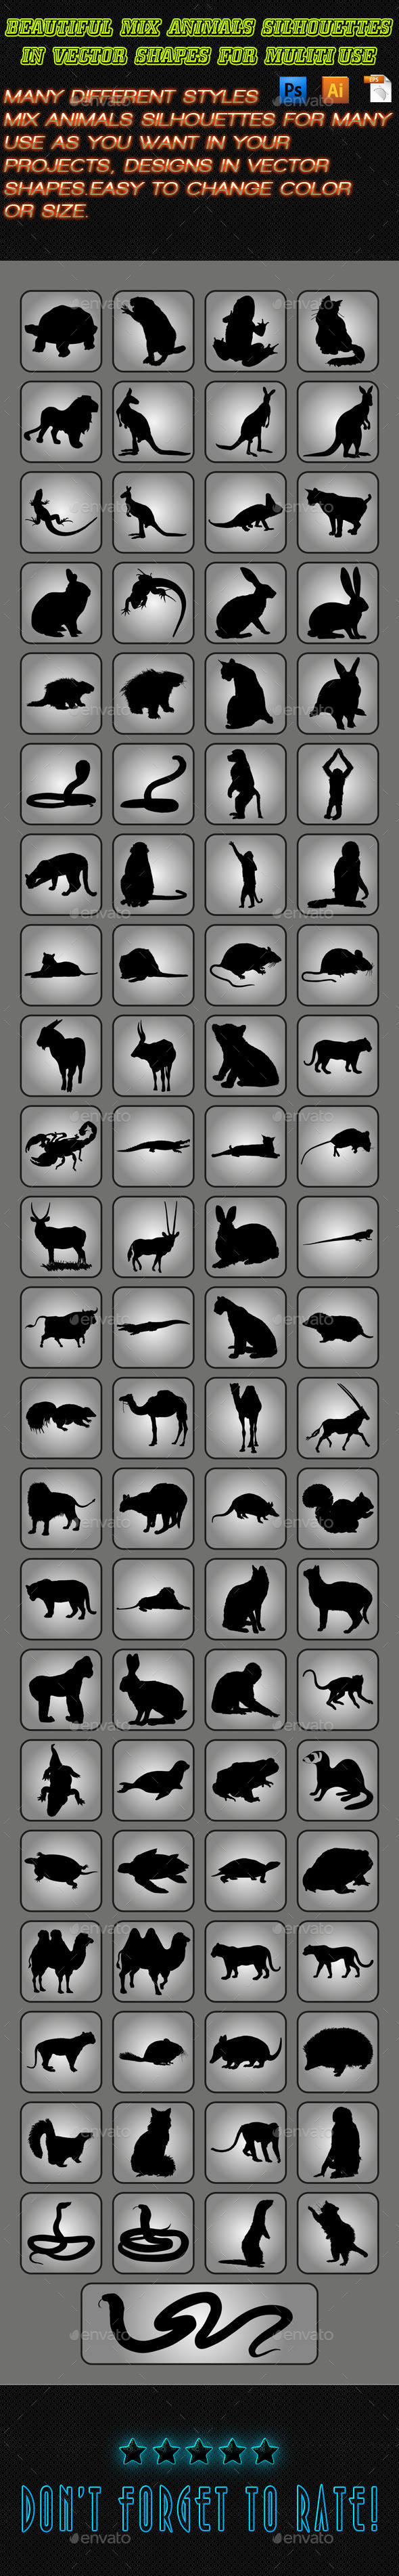 Mix 20animals 20silhouettes 2002 20template 20d image 201